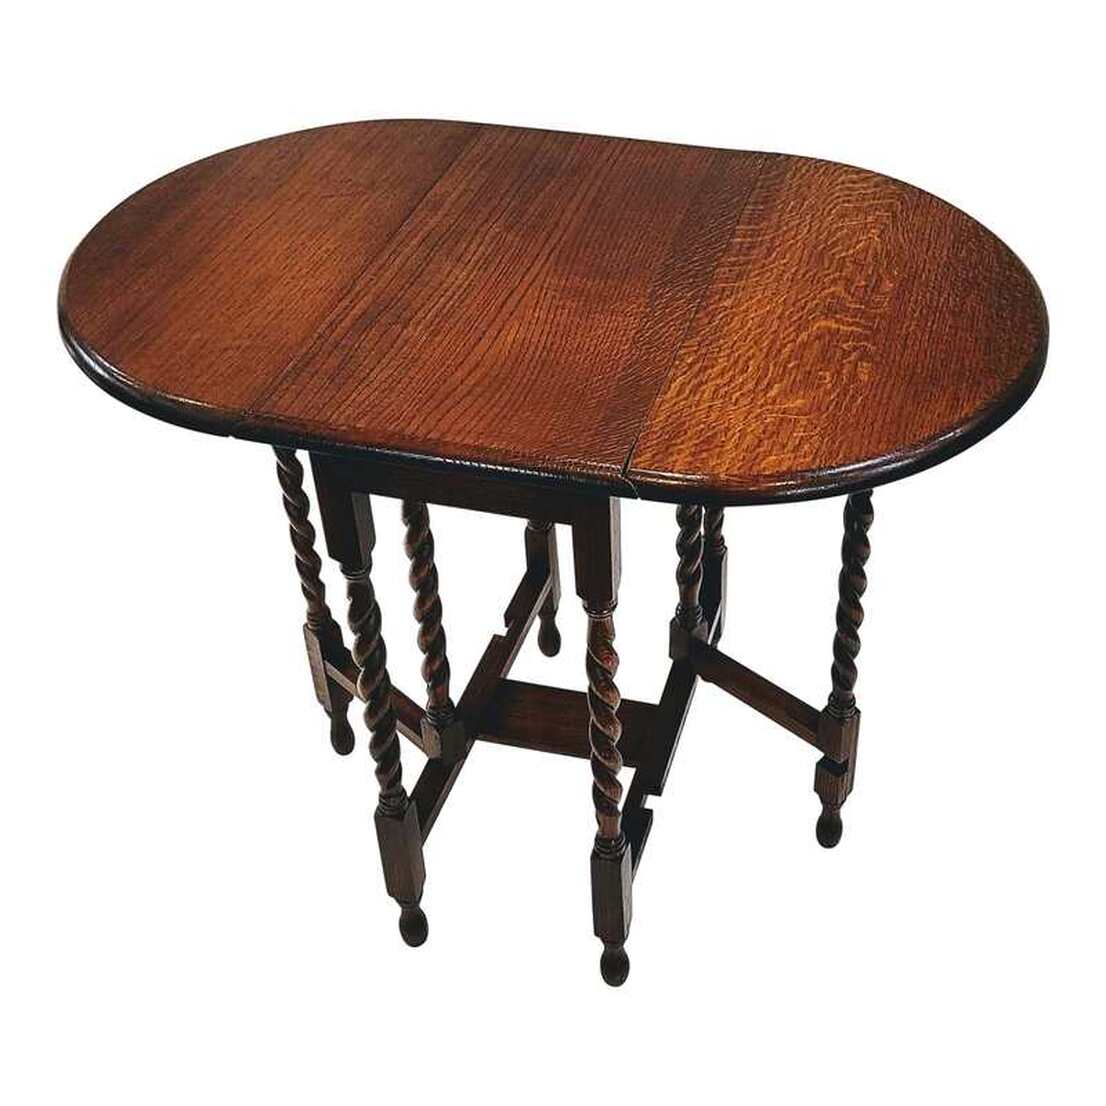 Petite oval drop-leaf table is ideal for smaller space living!  Antique English burl figured oak table easily extends by lifting its two leaves and swinging its gate-legs into place underneath.  The eight English brown oak legs have been turned into a barley sugar twist.